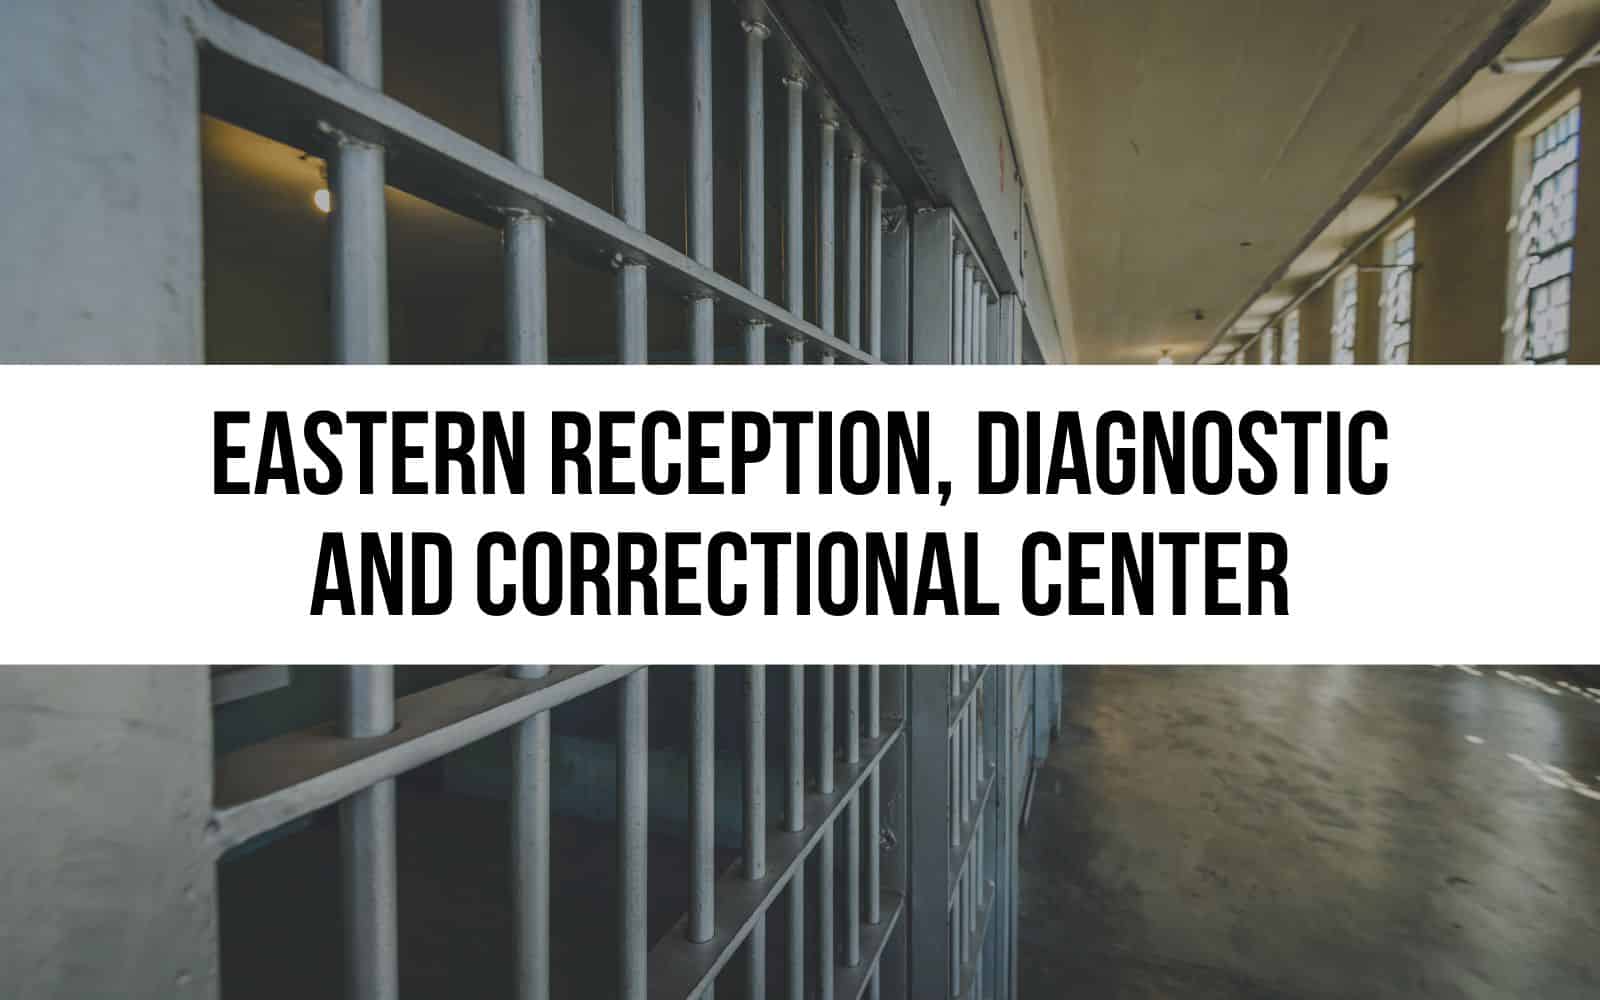 Eastern Reception Diagnostic and Correctional Center